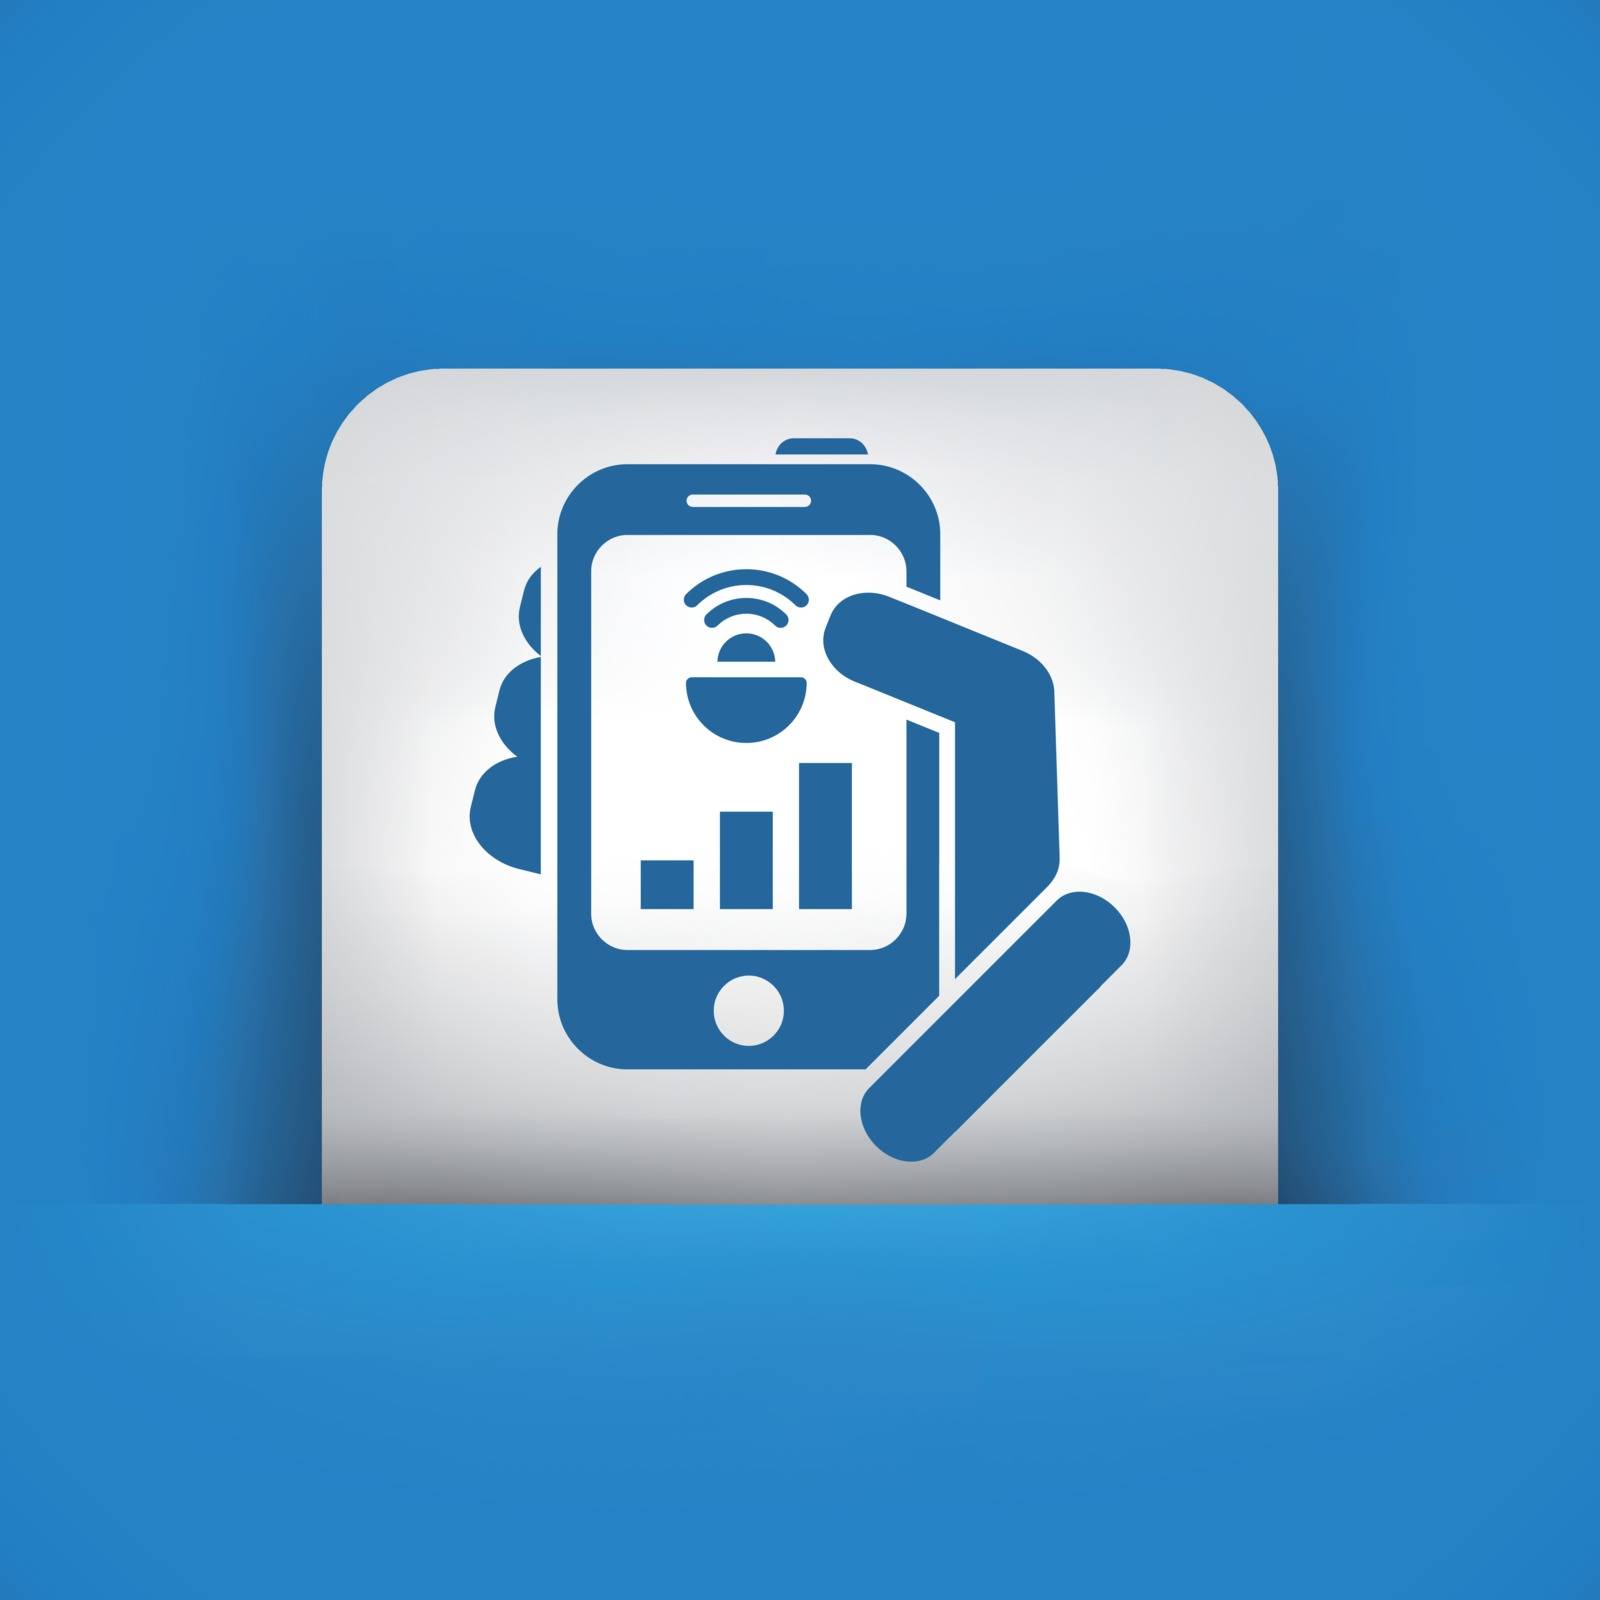 Smartphone connection icon by myVector